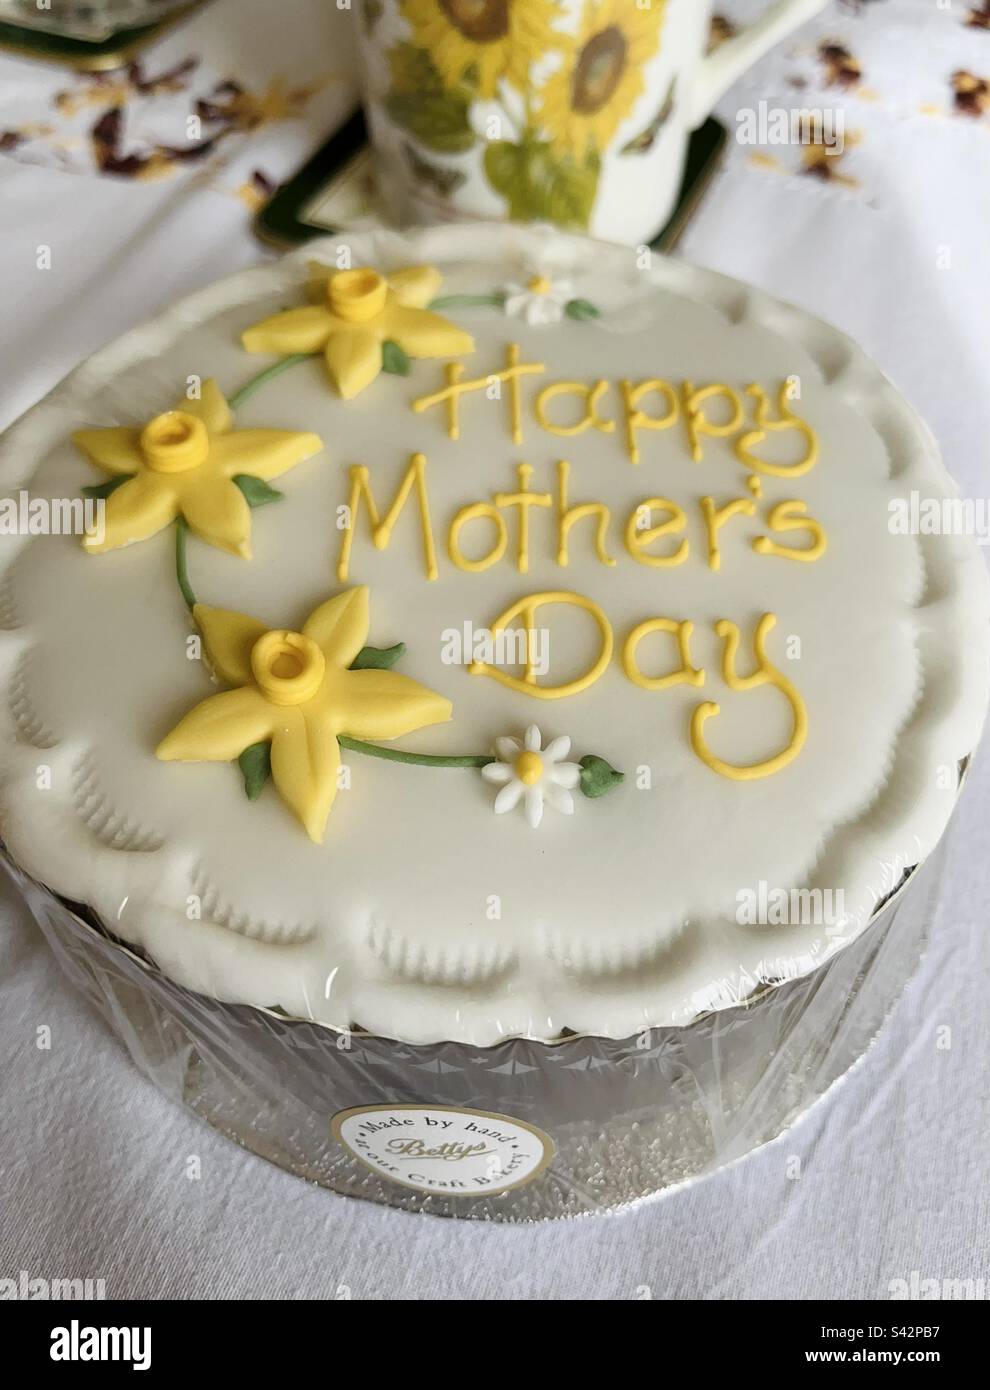 Mother’s Day celebration cake from Betty’s of Harrogate for afternoon tea Stock Photo